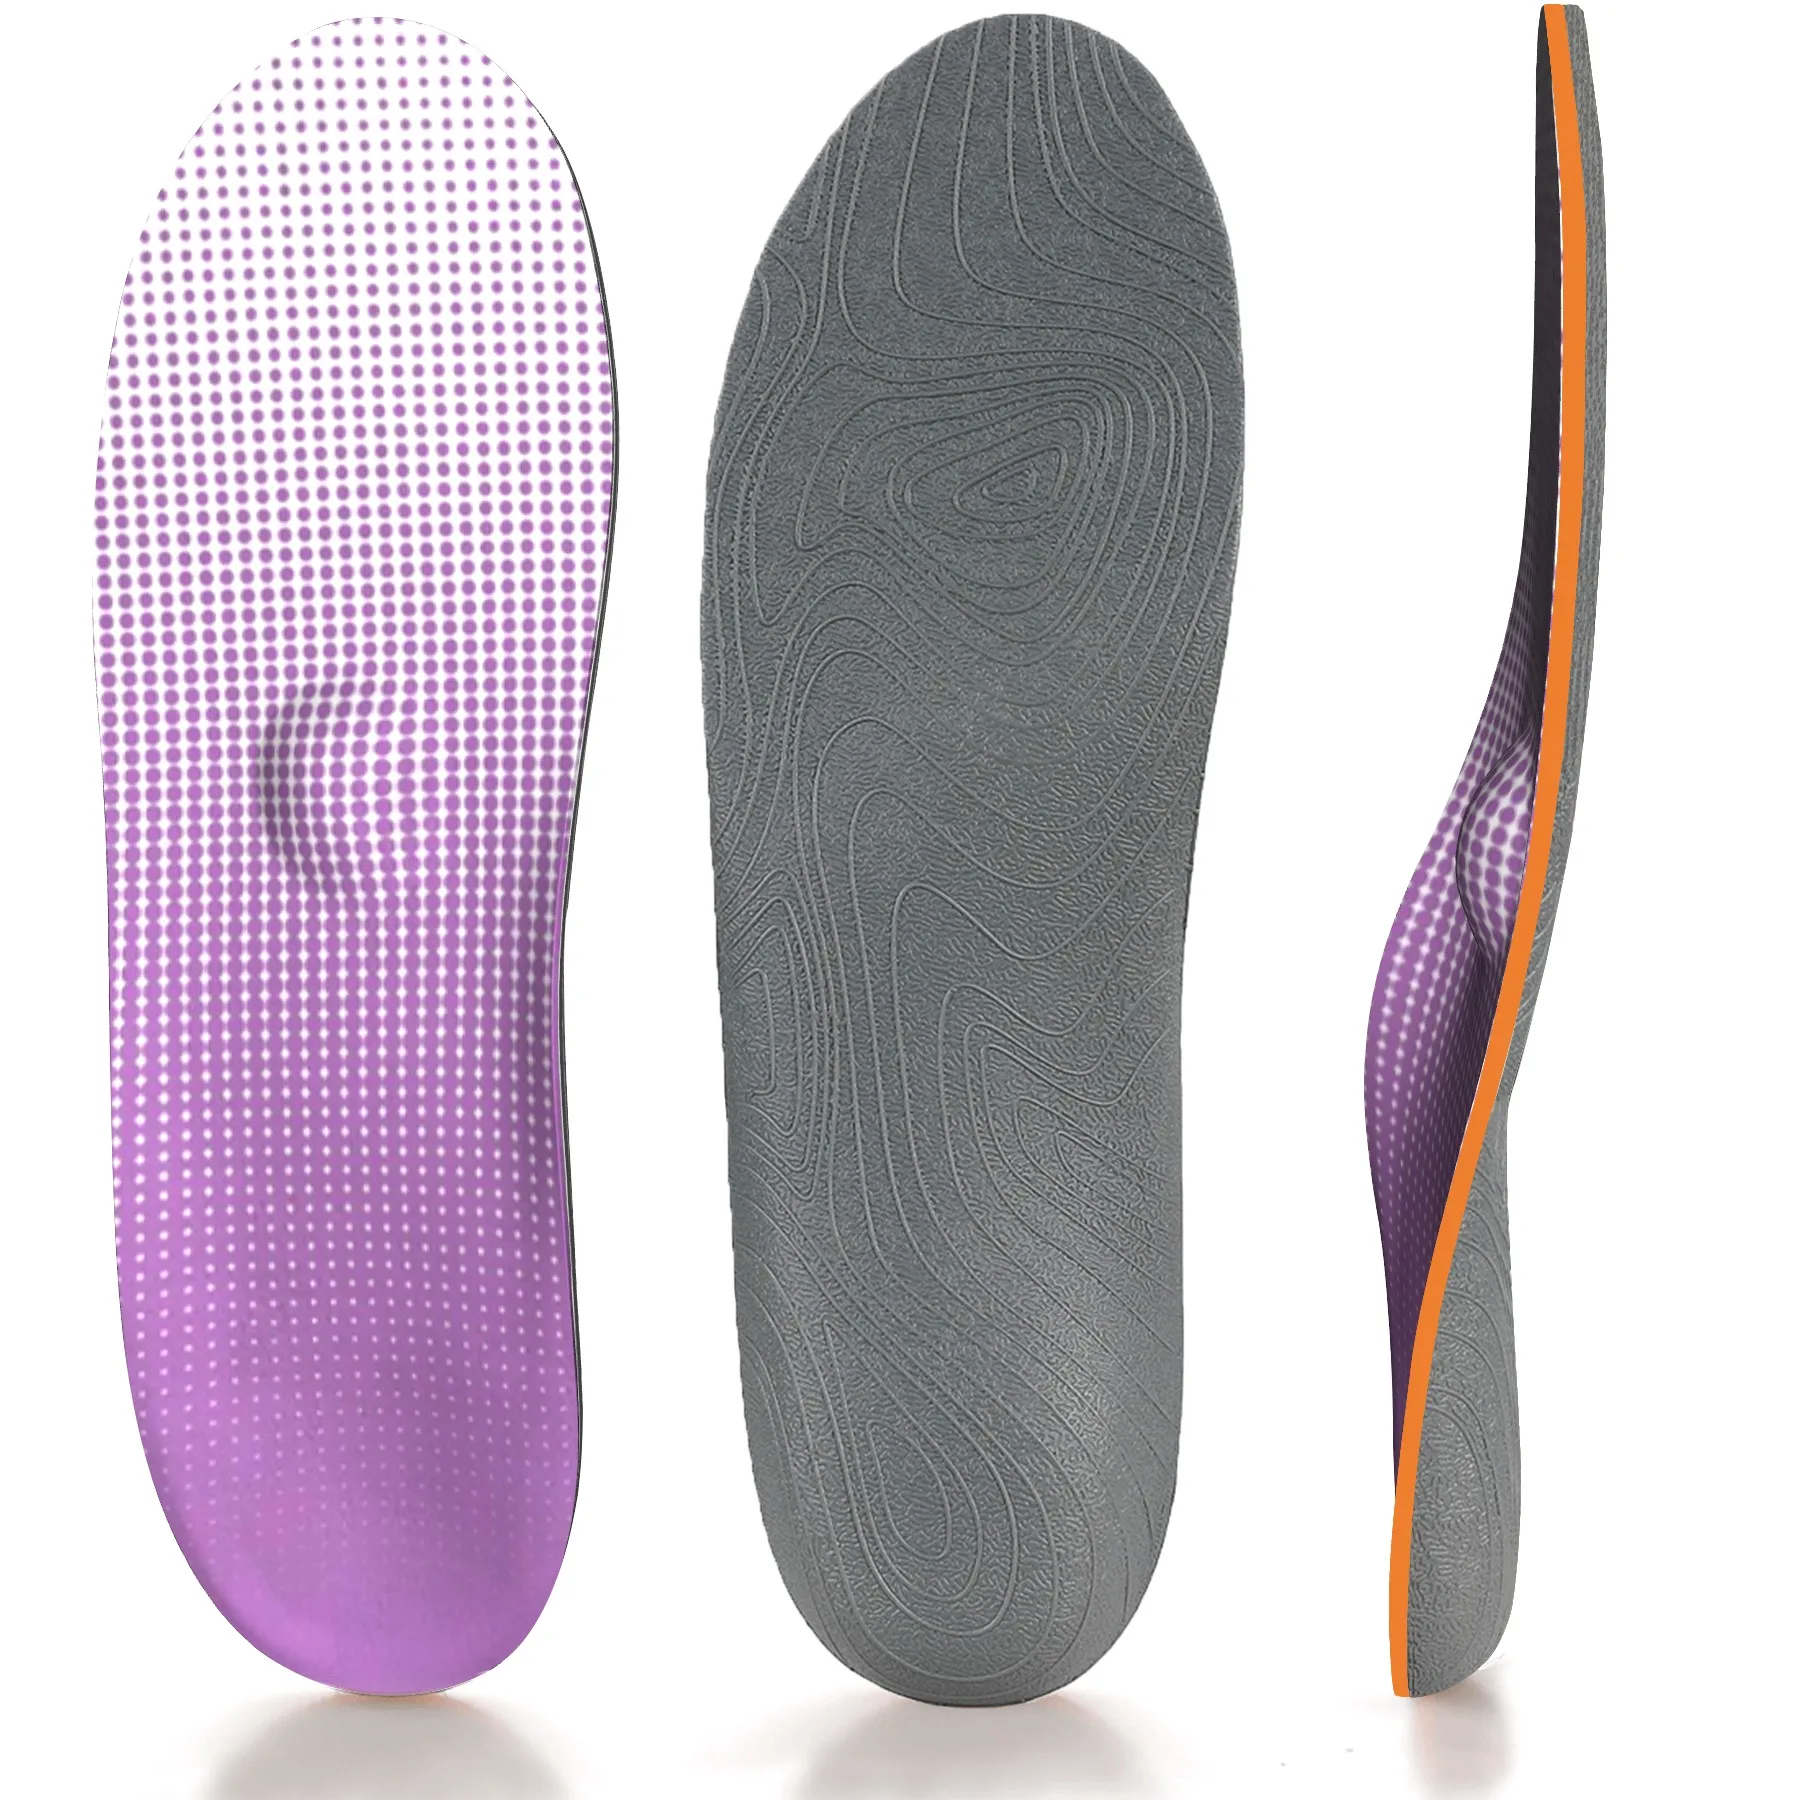 IFITNA Summer cool sports insoles Female Air permeability and moisture conductivity Running Foot protection insole